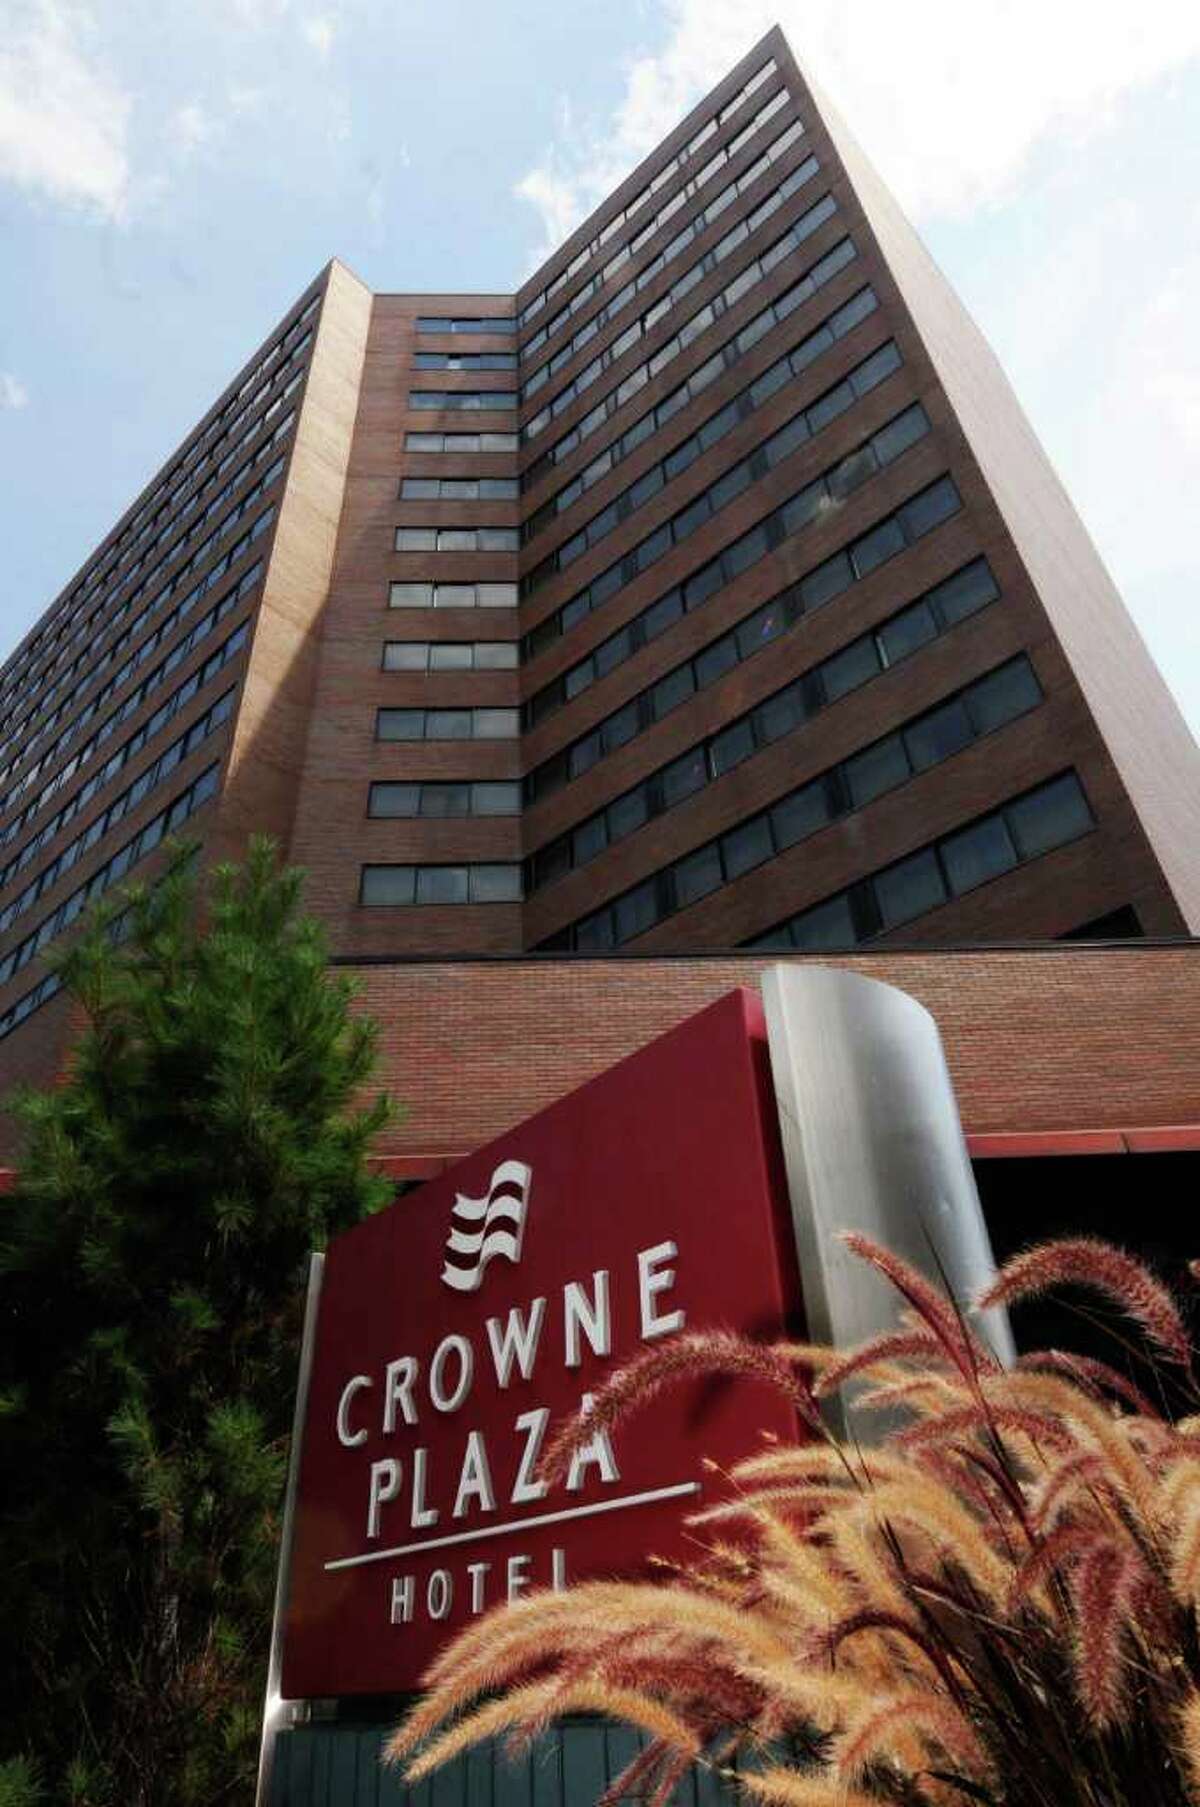 The Crowne Plaza Hotel on State Street in Albany, NY Friday Aug. 19,2011.( Michael P. Farrell/Times Union)